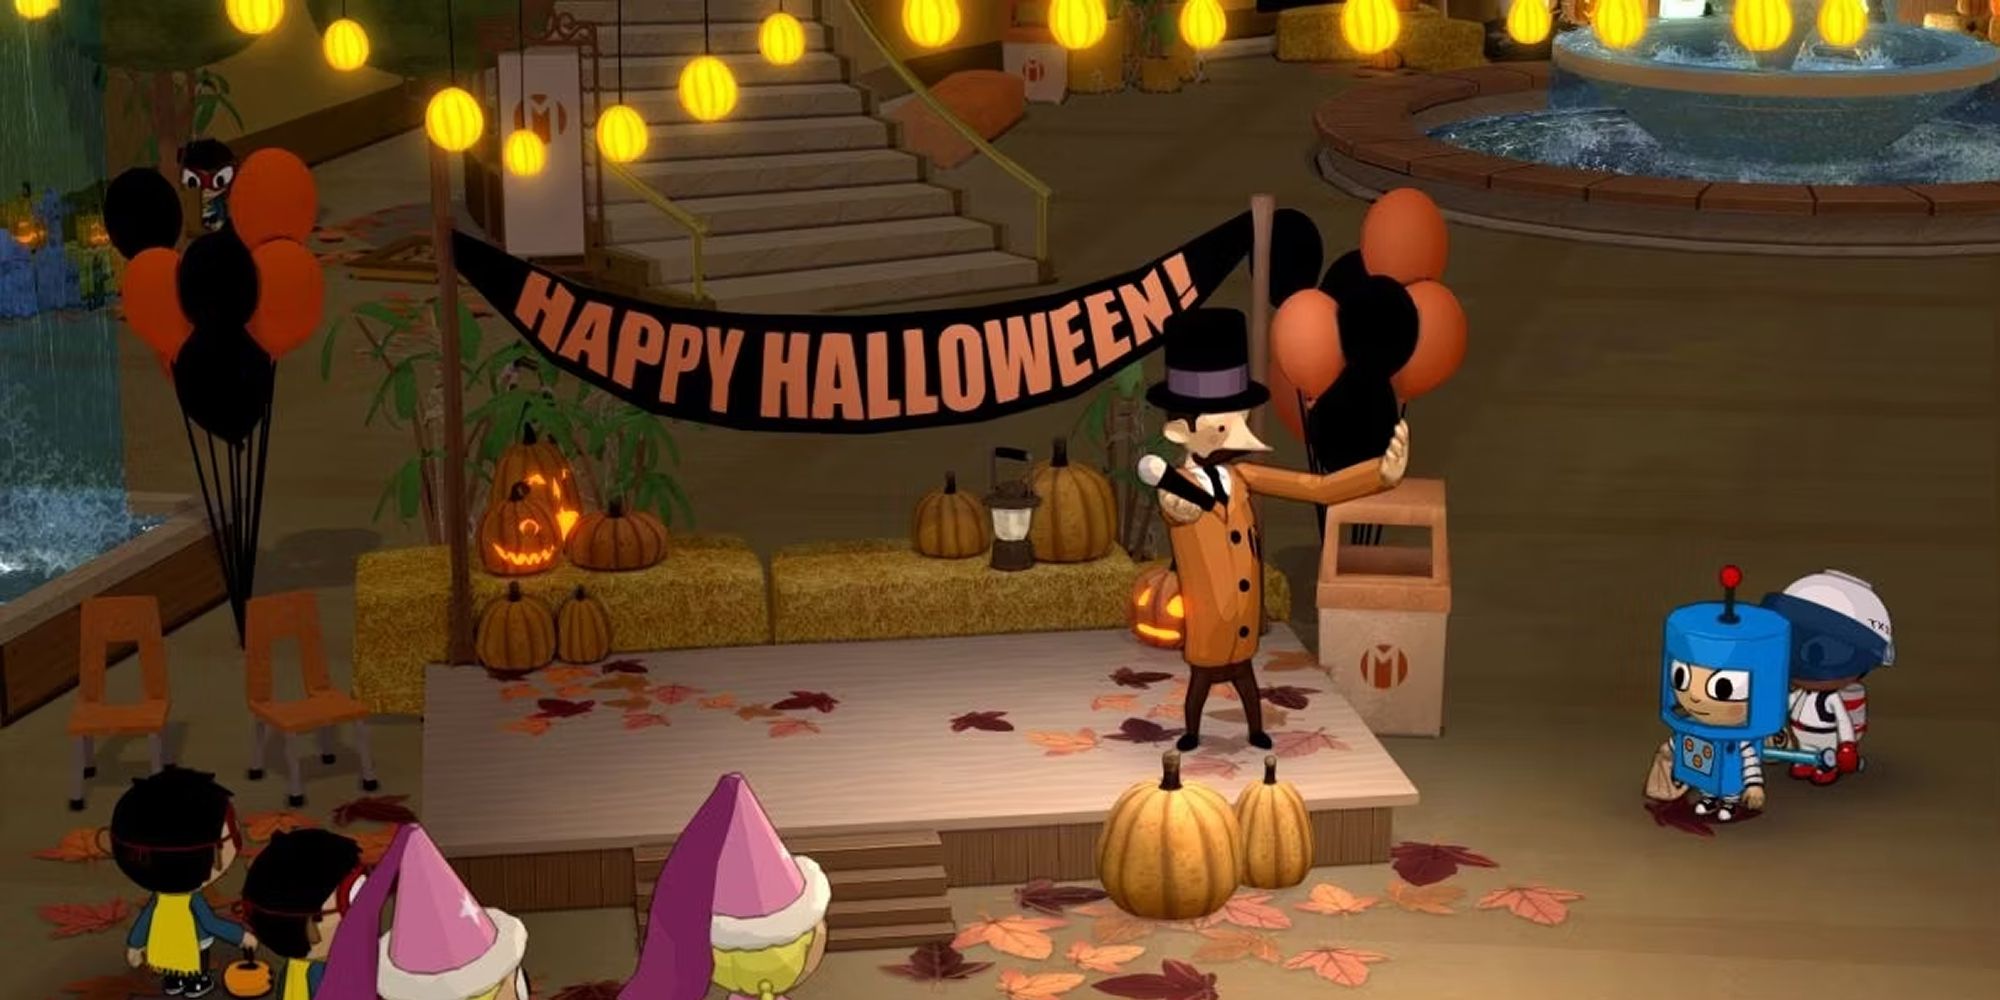 Costume Quest Characters Attending A Halloween Event